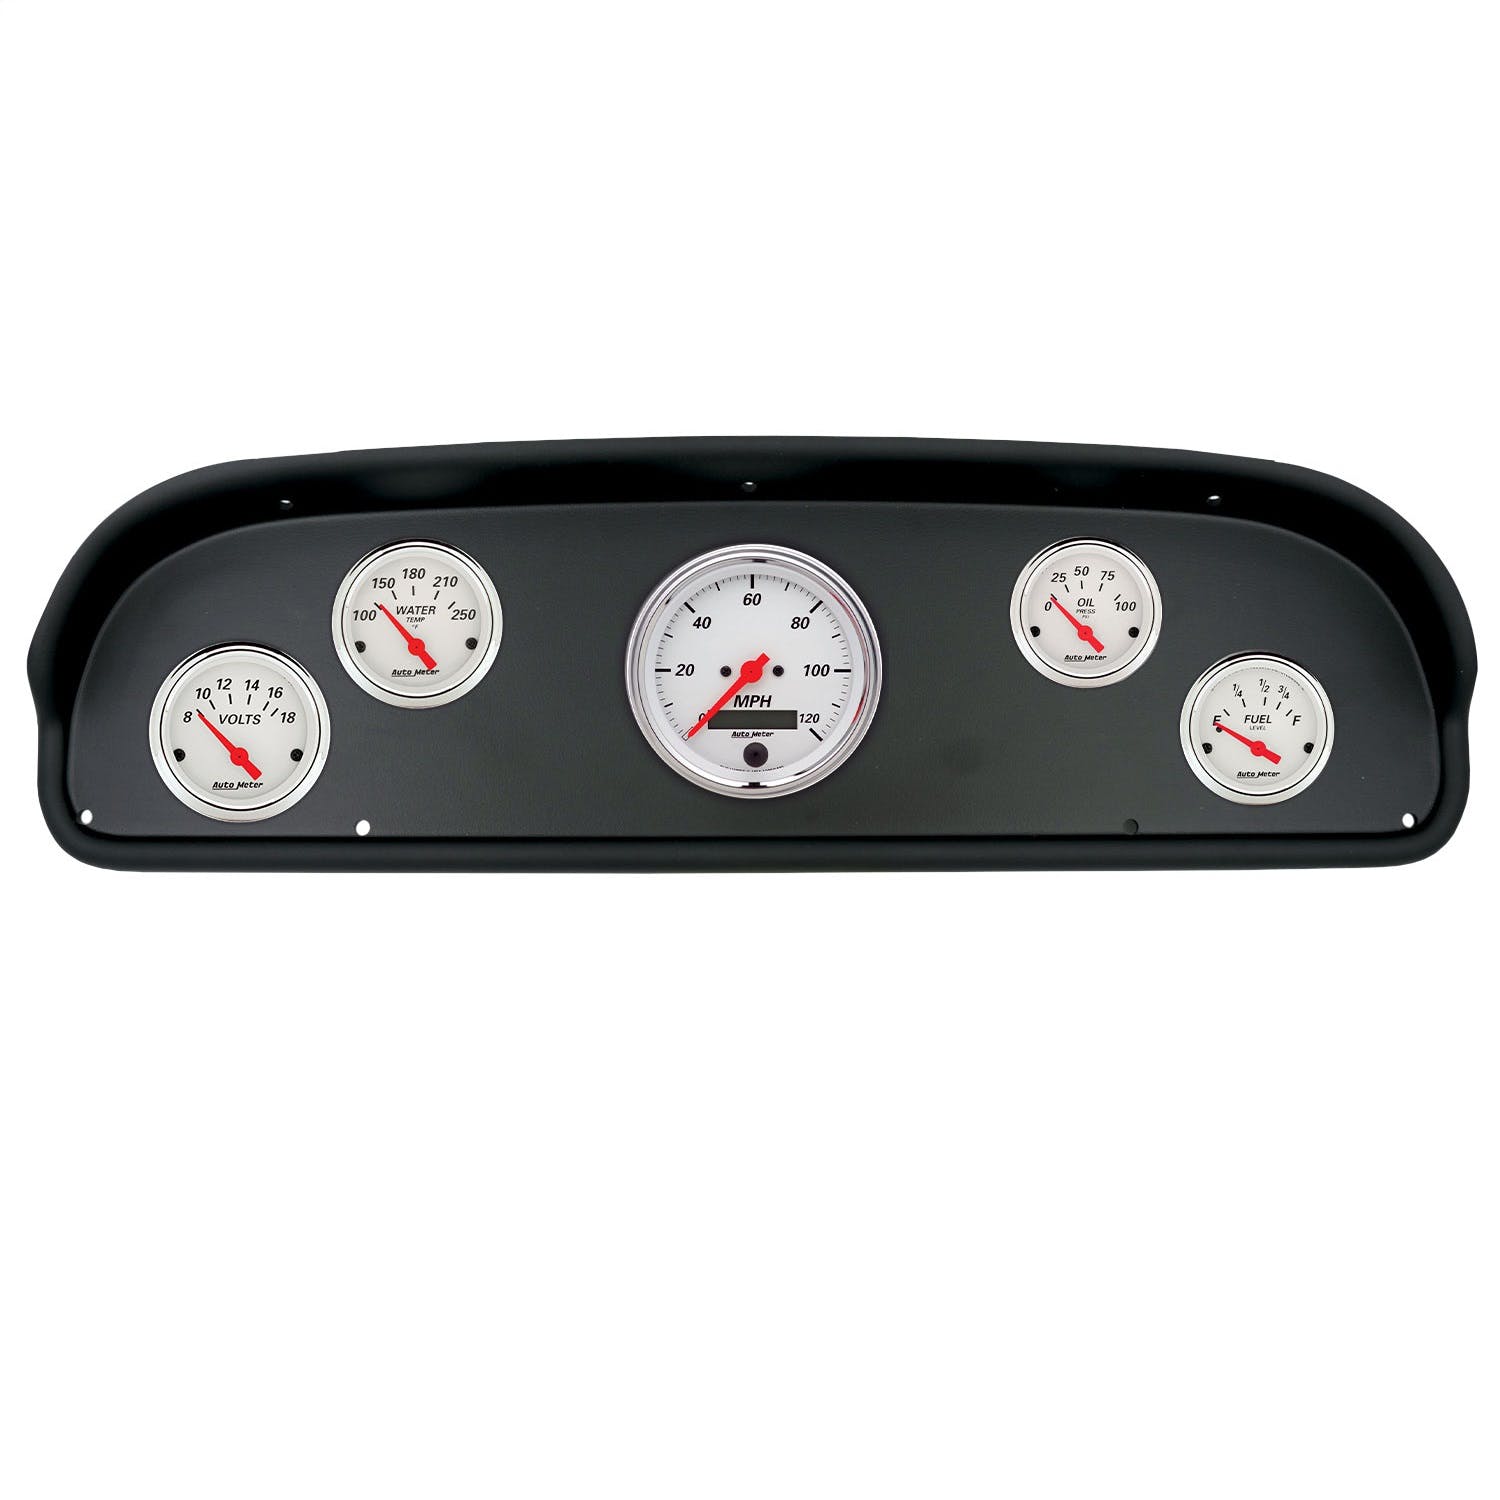 AutoMeter Products 2100-03 5 Gauge Direct-Fit Dash Kit, Ford F100 57-60, Arctic White